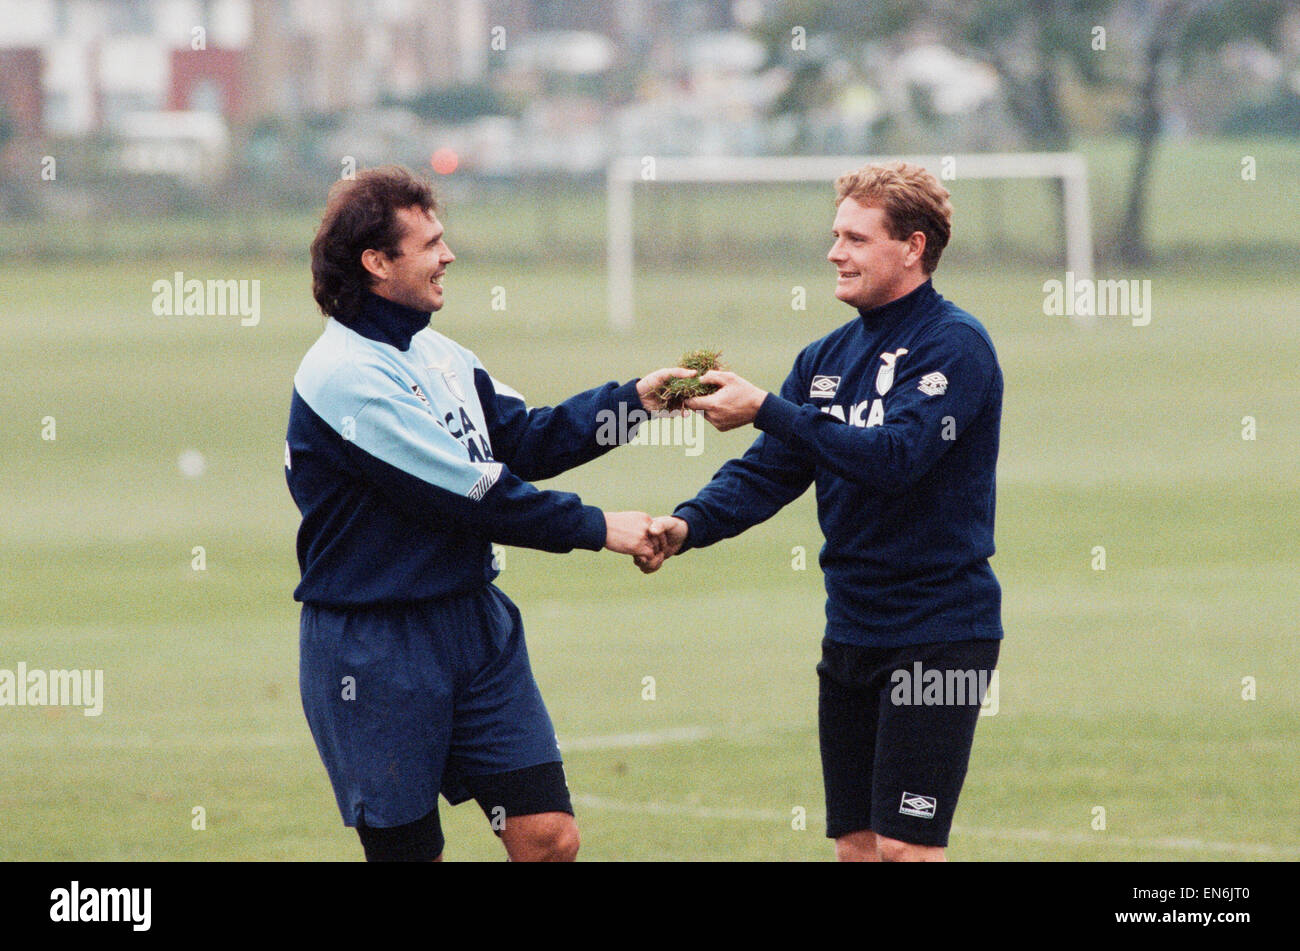 Lazio footballer Paul Gascoigne is handed a piece of turf by teammate Roberto Cravero during a team training session. 19th October 1992. Stock Photo